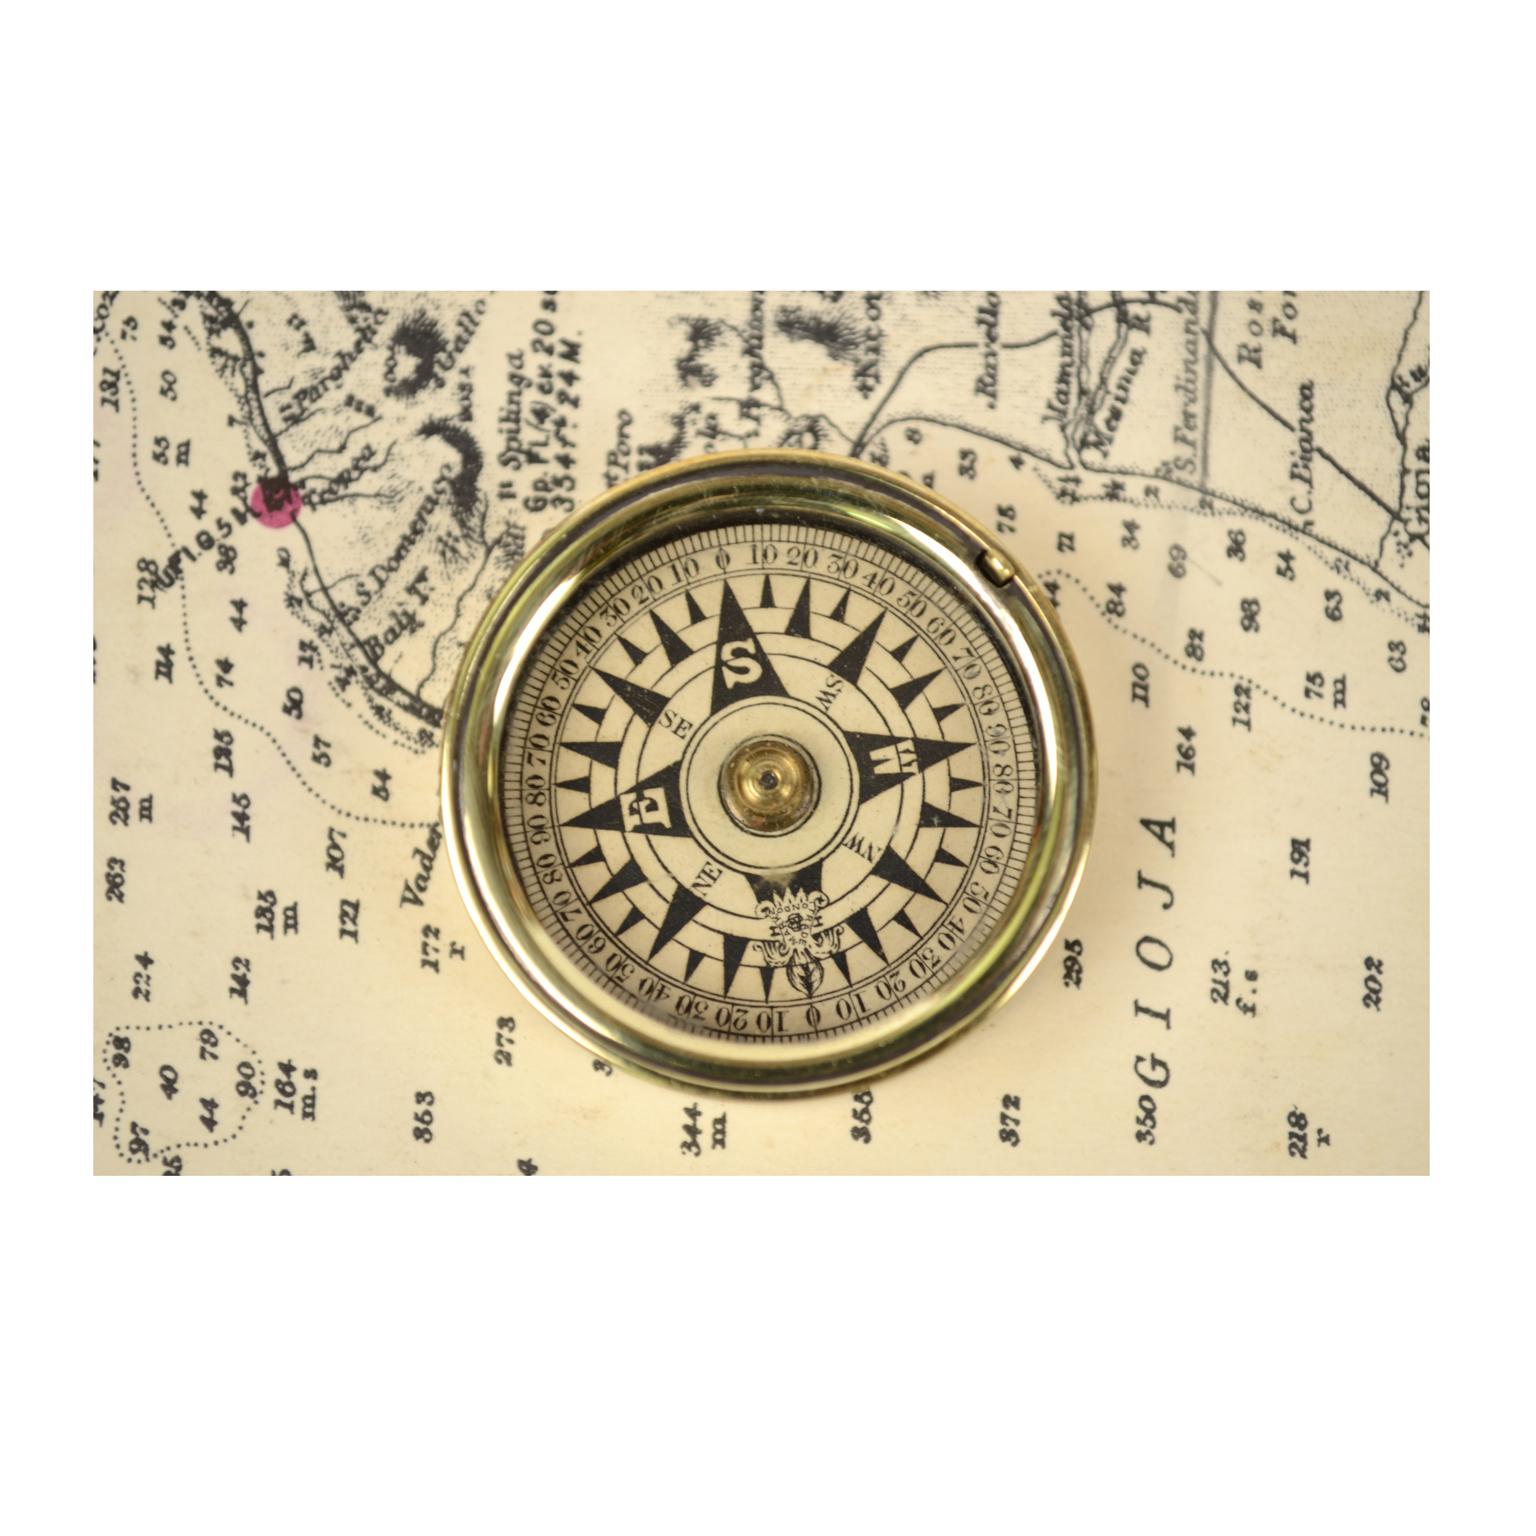 Mid-19th Century Dry Pocket Nautical Compass Placed in Its Original Box Made of Turned Brass